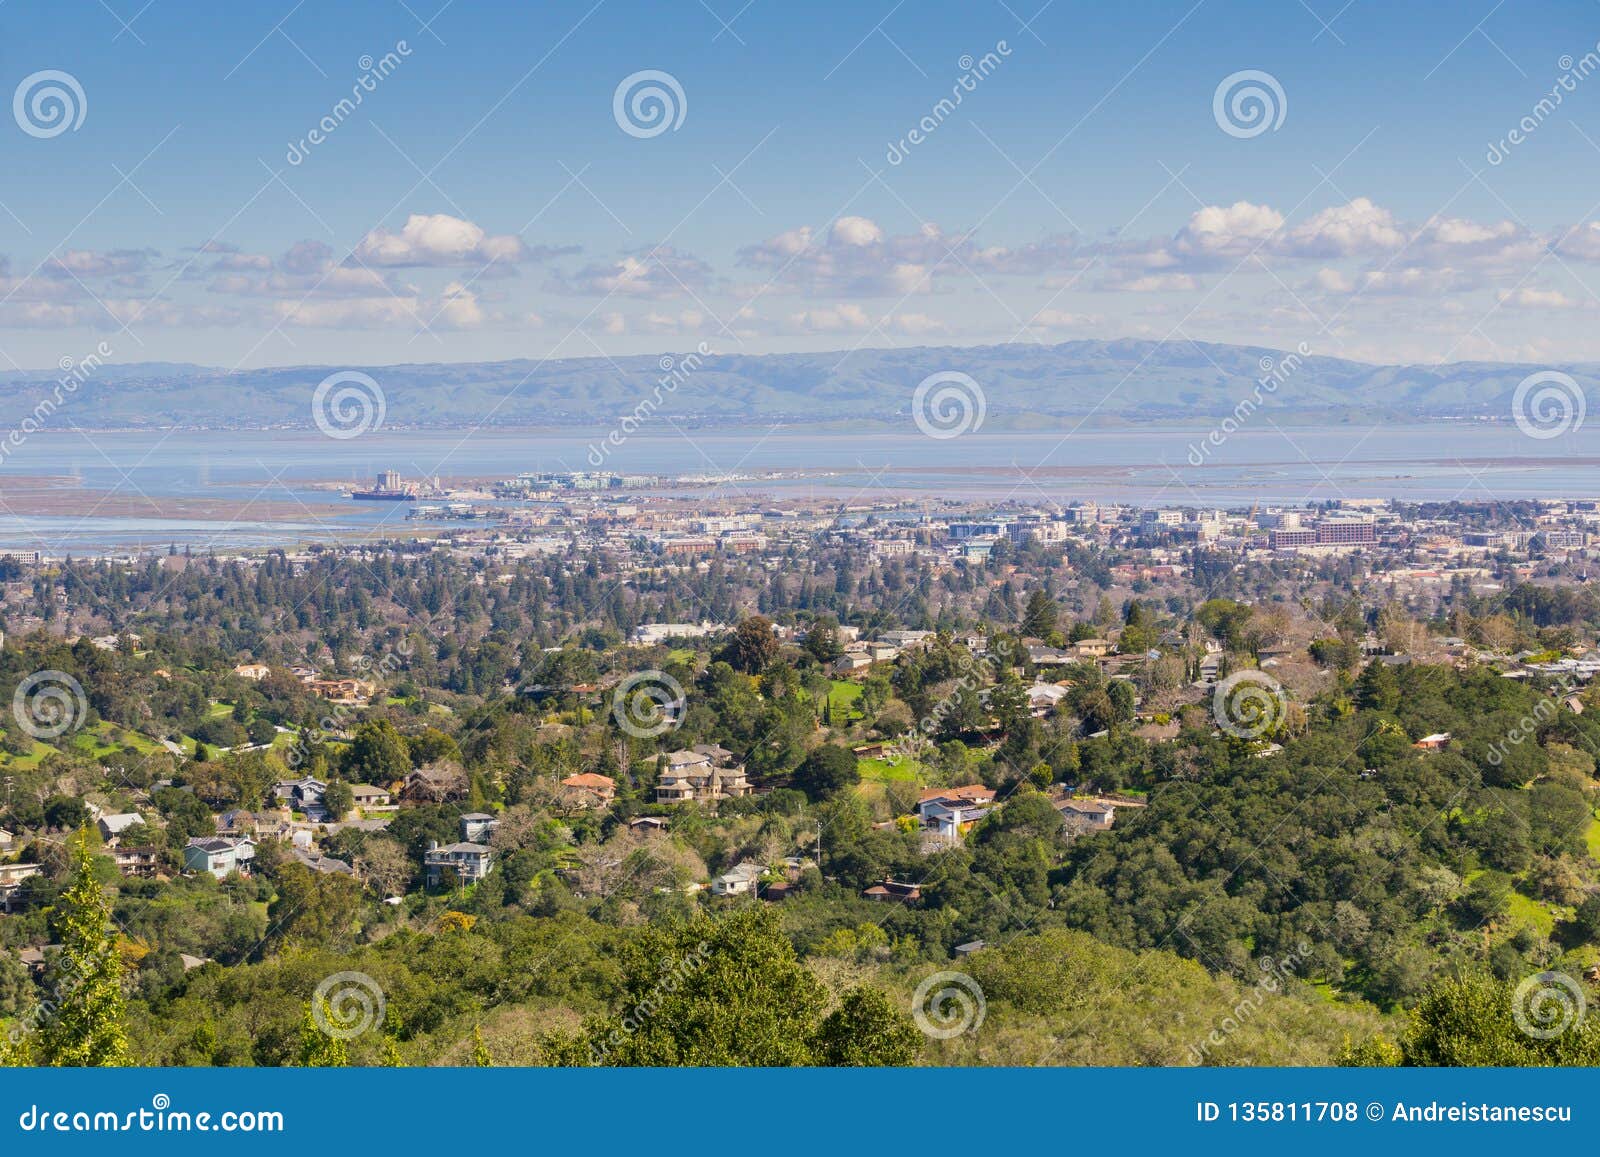 aerial view of redwood city, silicon valley, san francisco bay, california